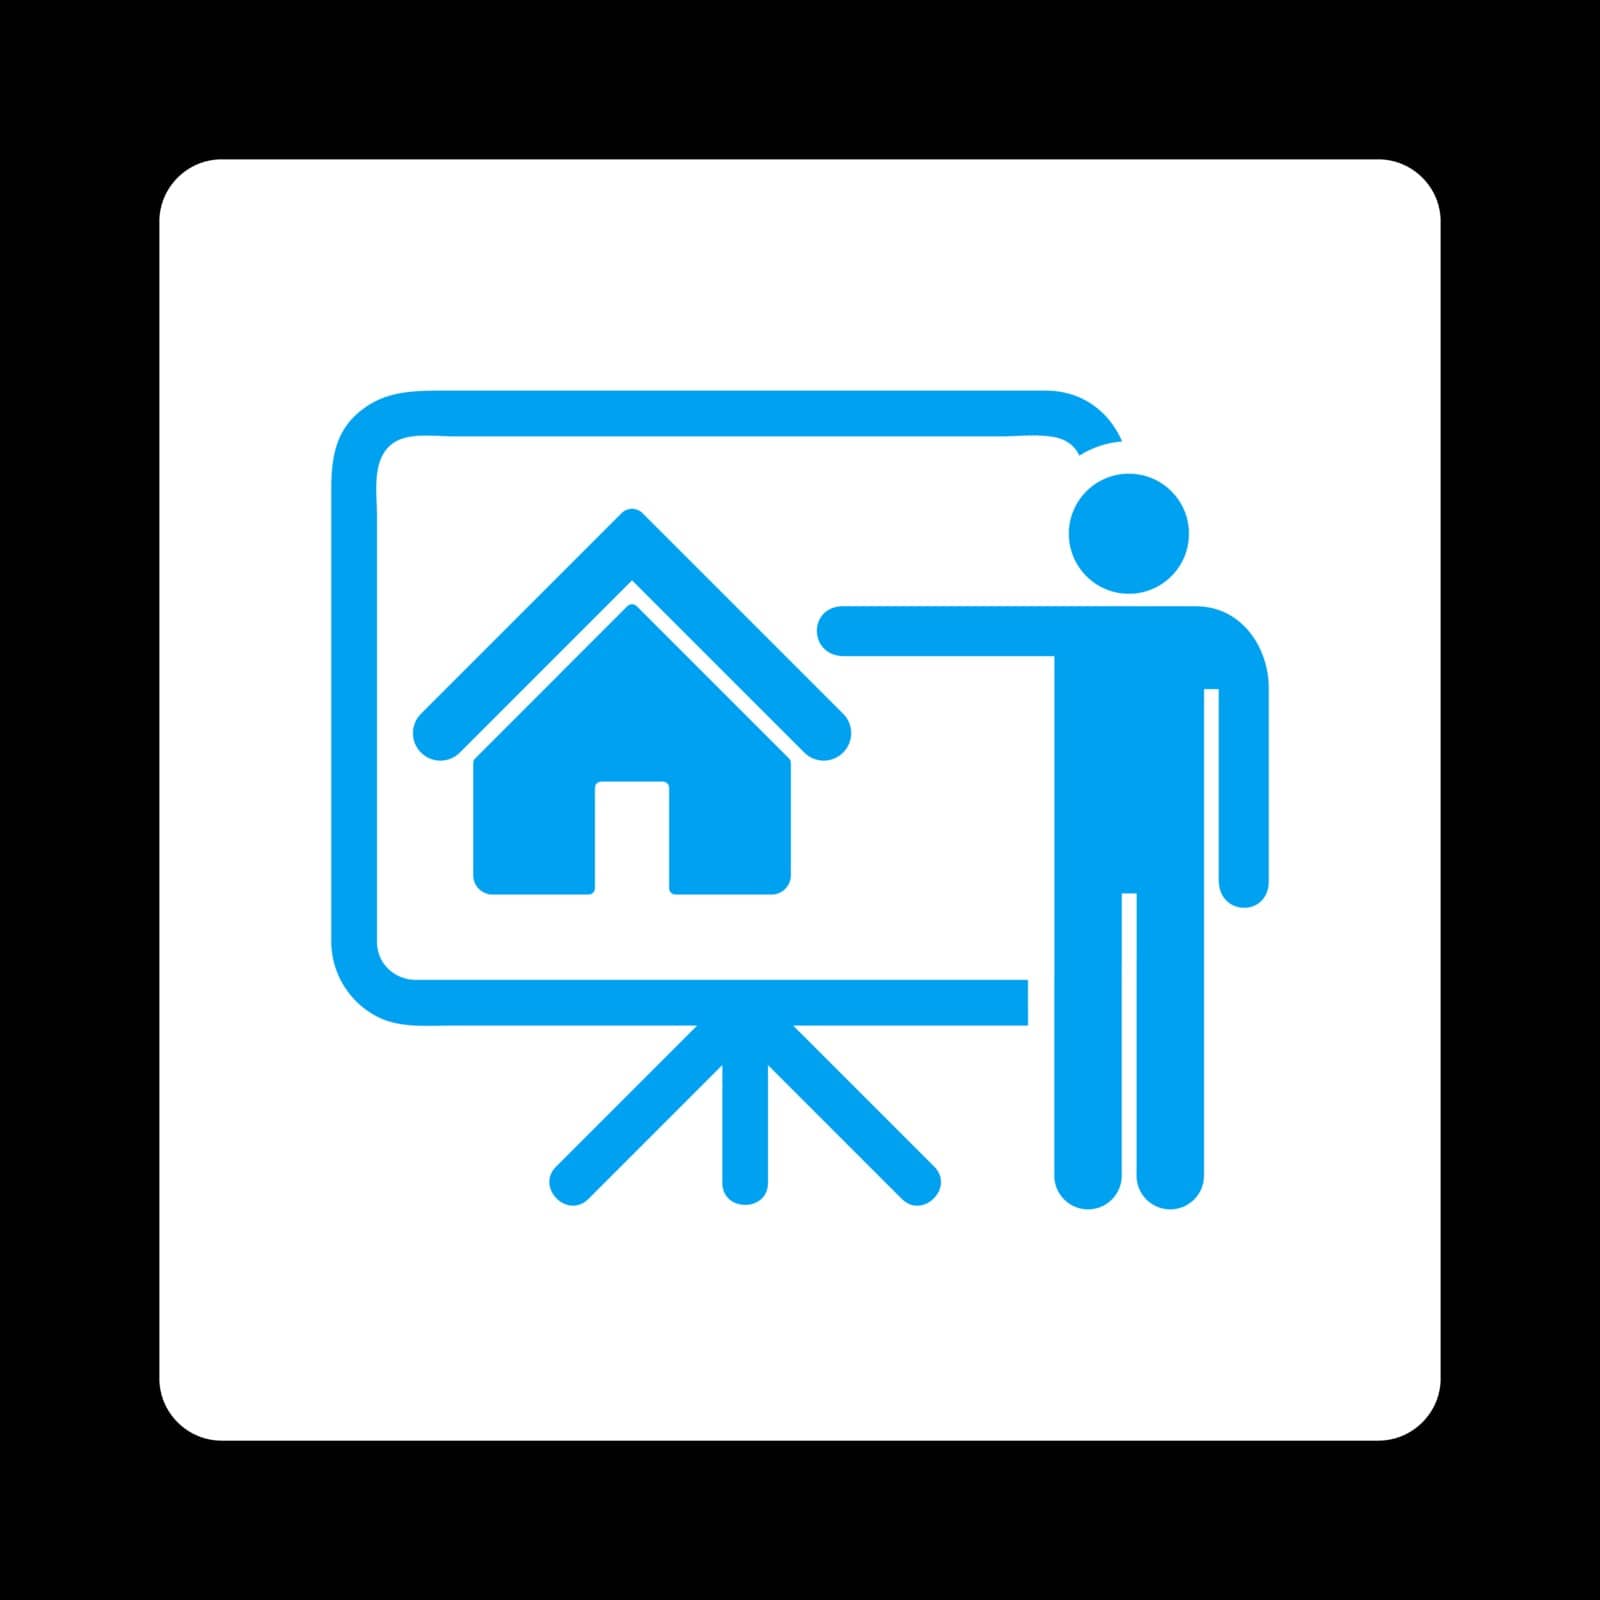 Realtor icon. Vector style is blue and white colors, flat rounded square button on a black background.